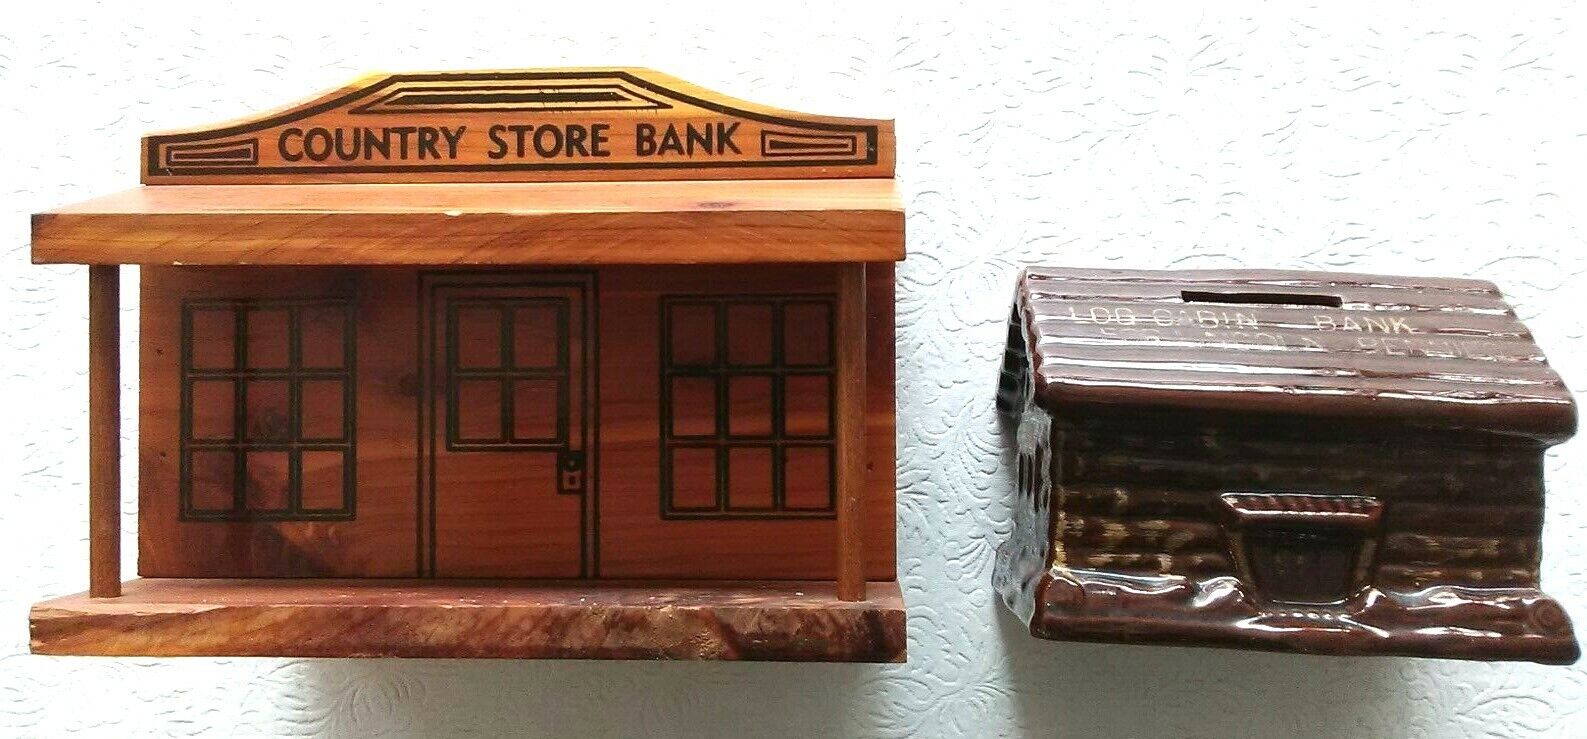 Lot of Two Vintage Banks - Country Store and Lincoln Log Cabin Без бренда - фотография #2